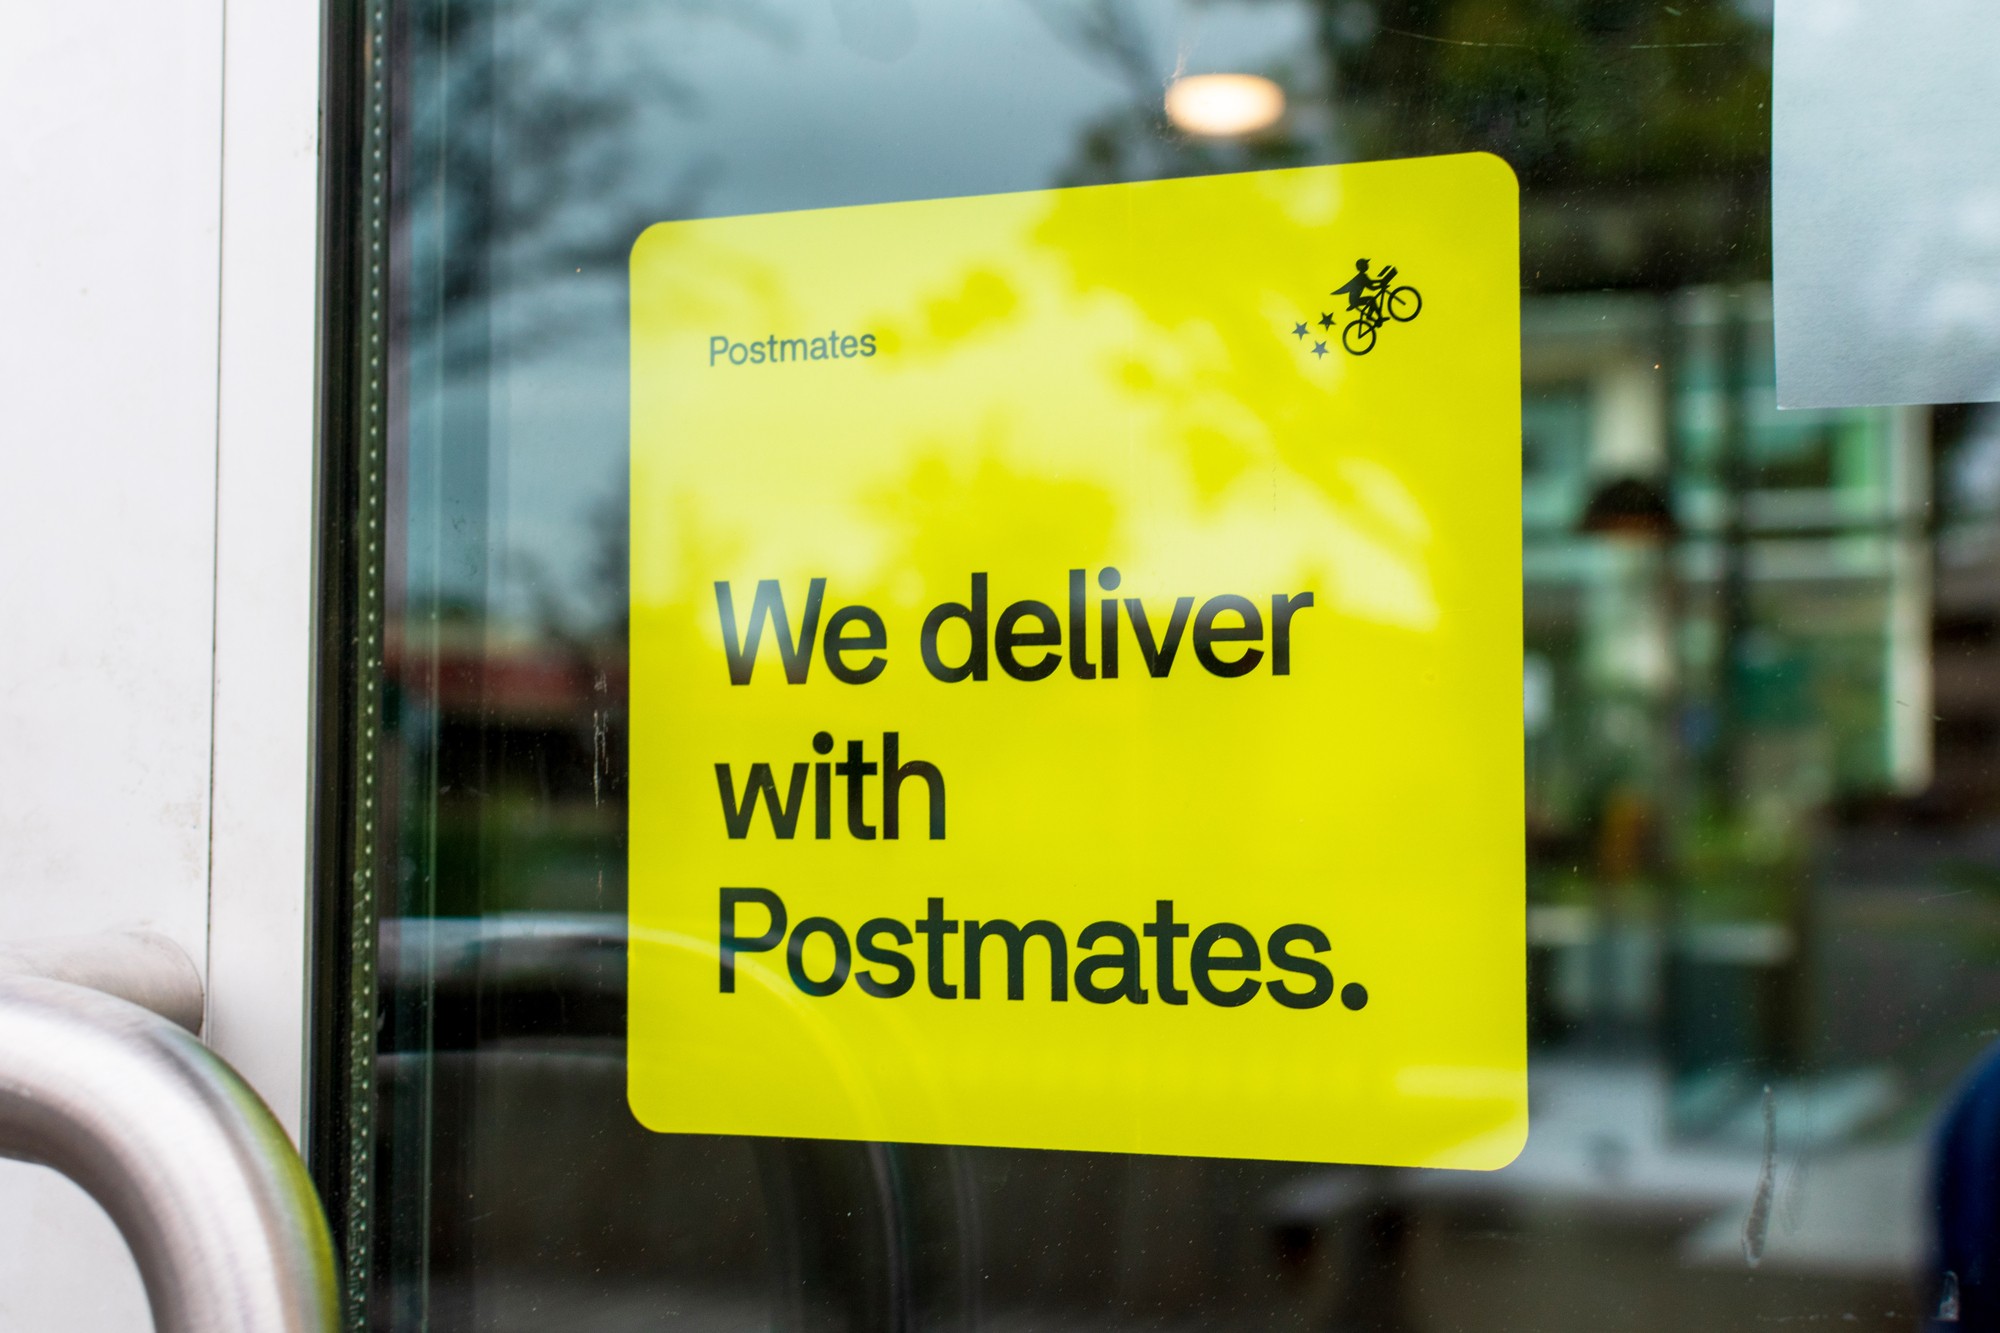 A yellow sticker decal advertising Postmates delivery service